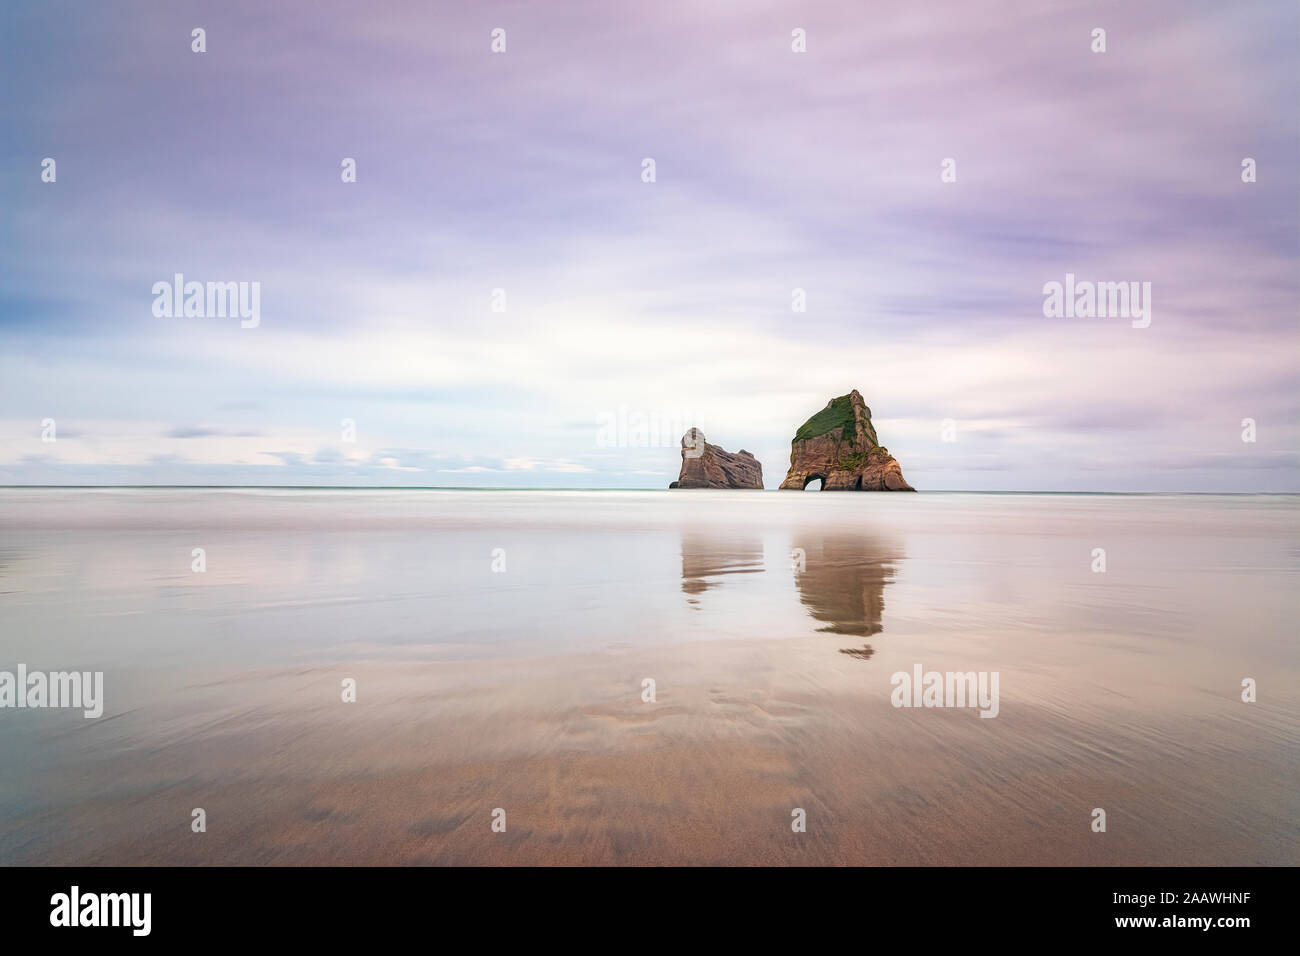 New Zealand, South Island, Wharariki Beach, Archway Islands, rock formations in sea Stock Photo